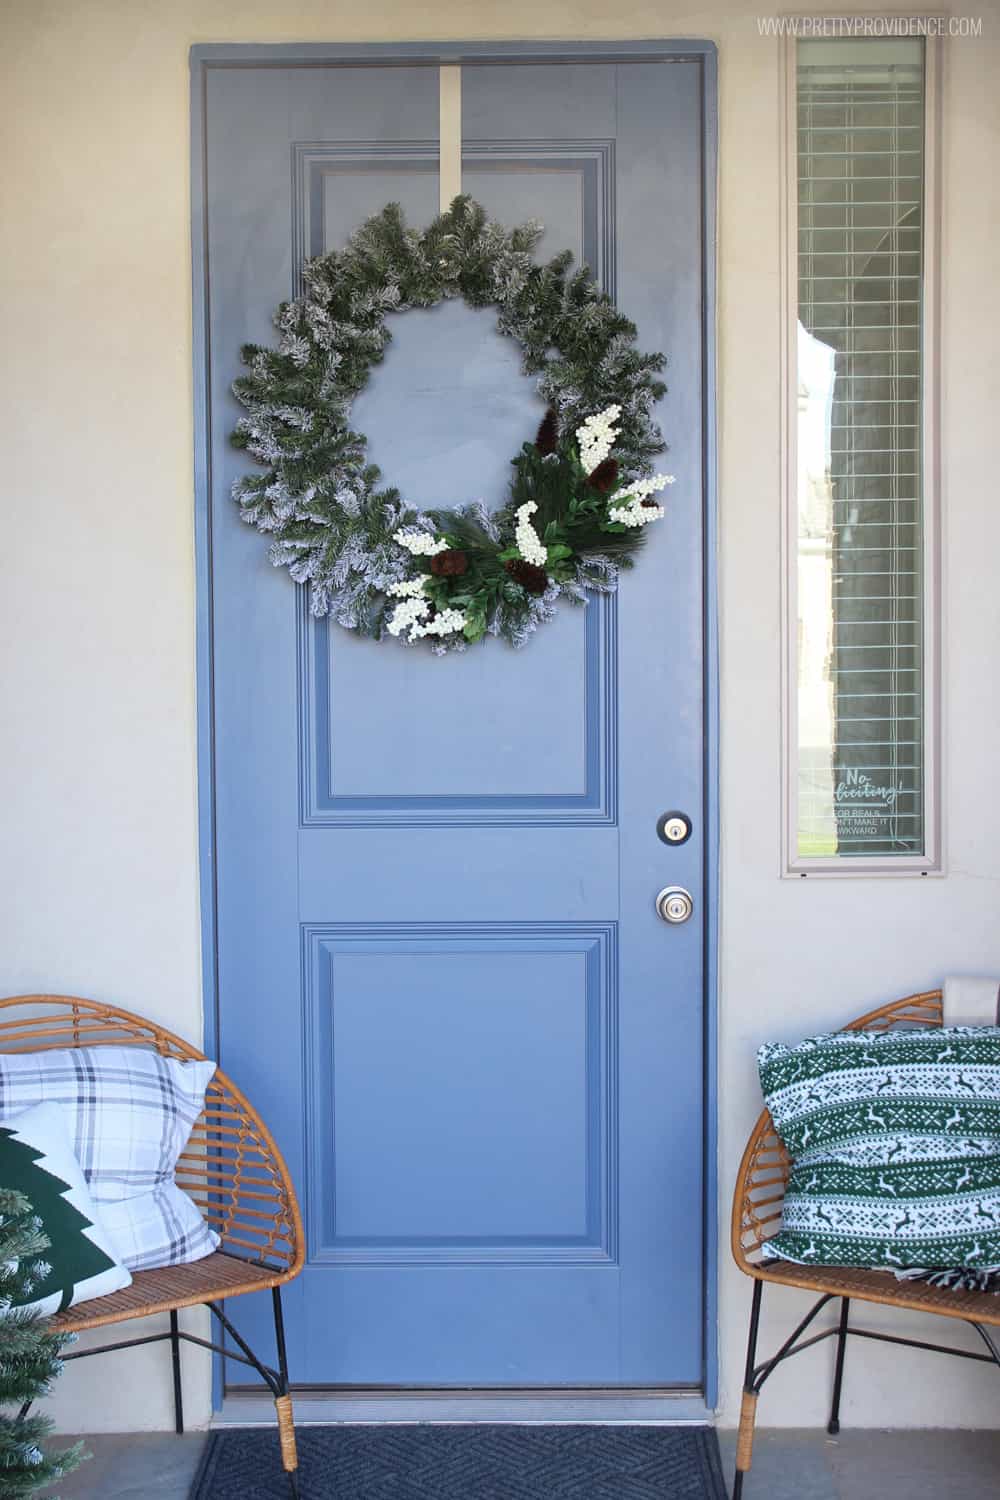 https://prettyprovidence.com/christmas-front-porch/#more-20636